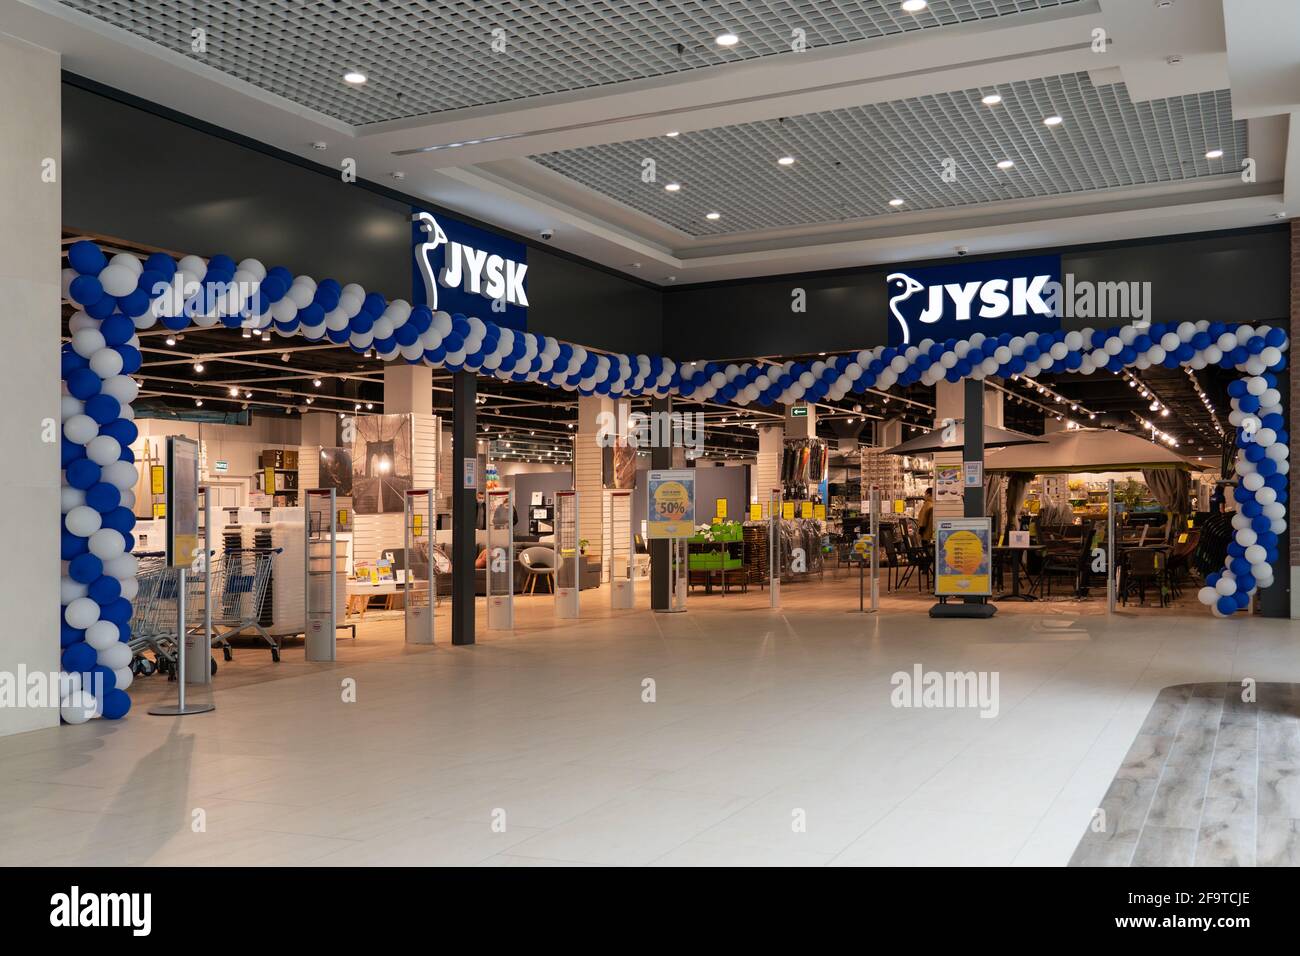 Jysk High Resolution Stock and Images - Alamy